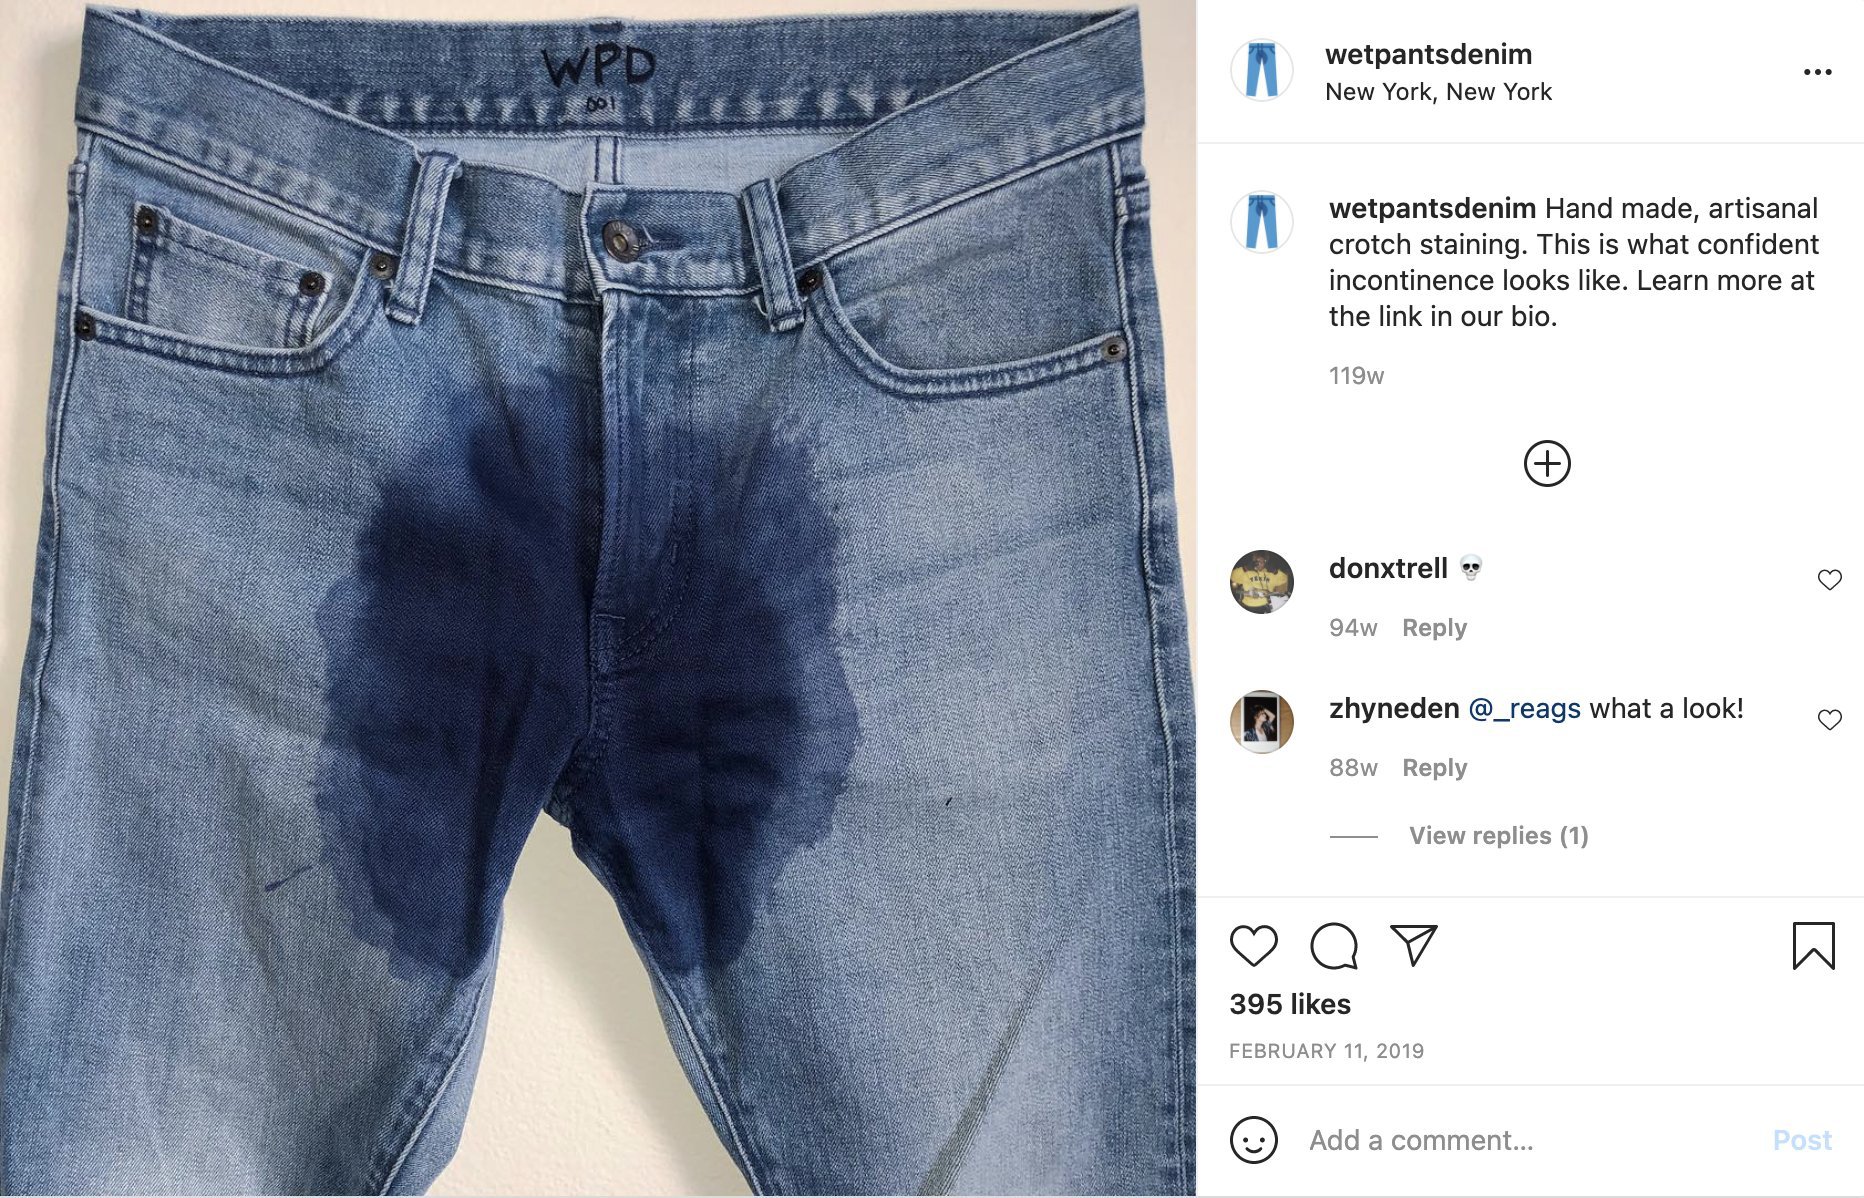 Company That Sells Jeans With Fake Pee Stains On Them